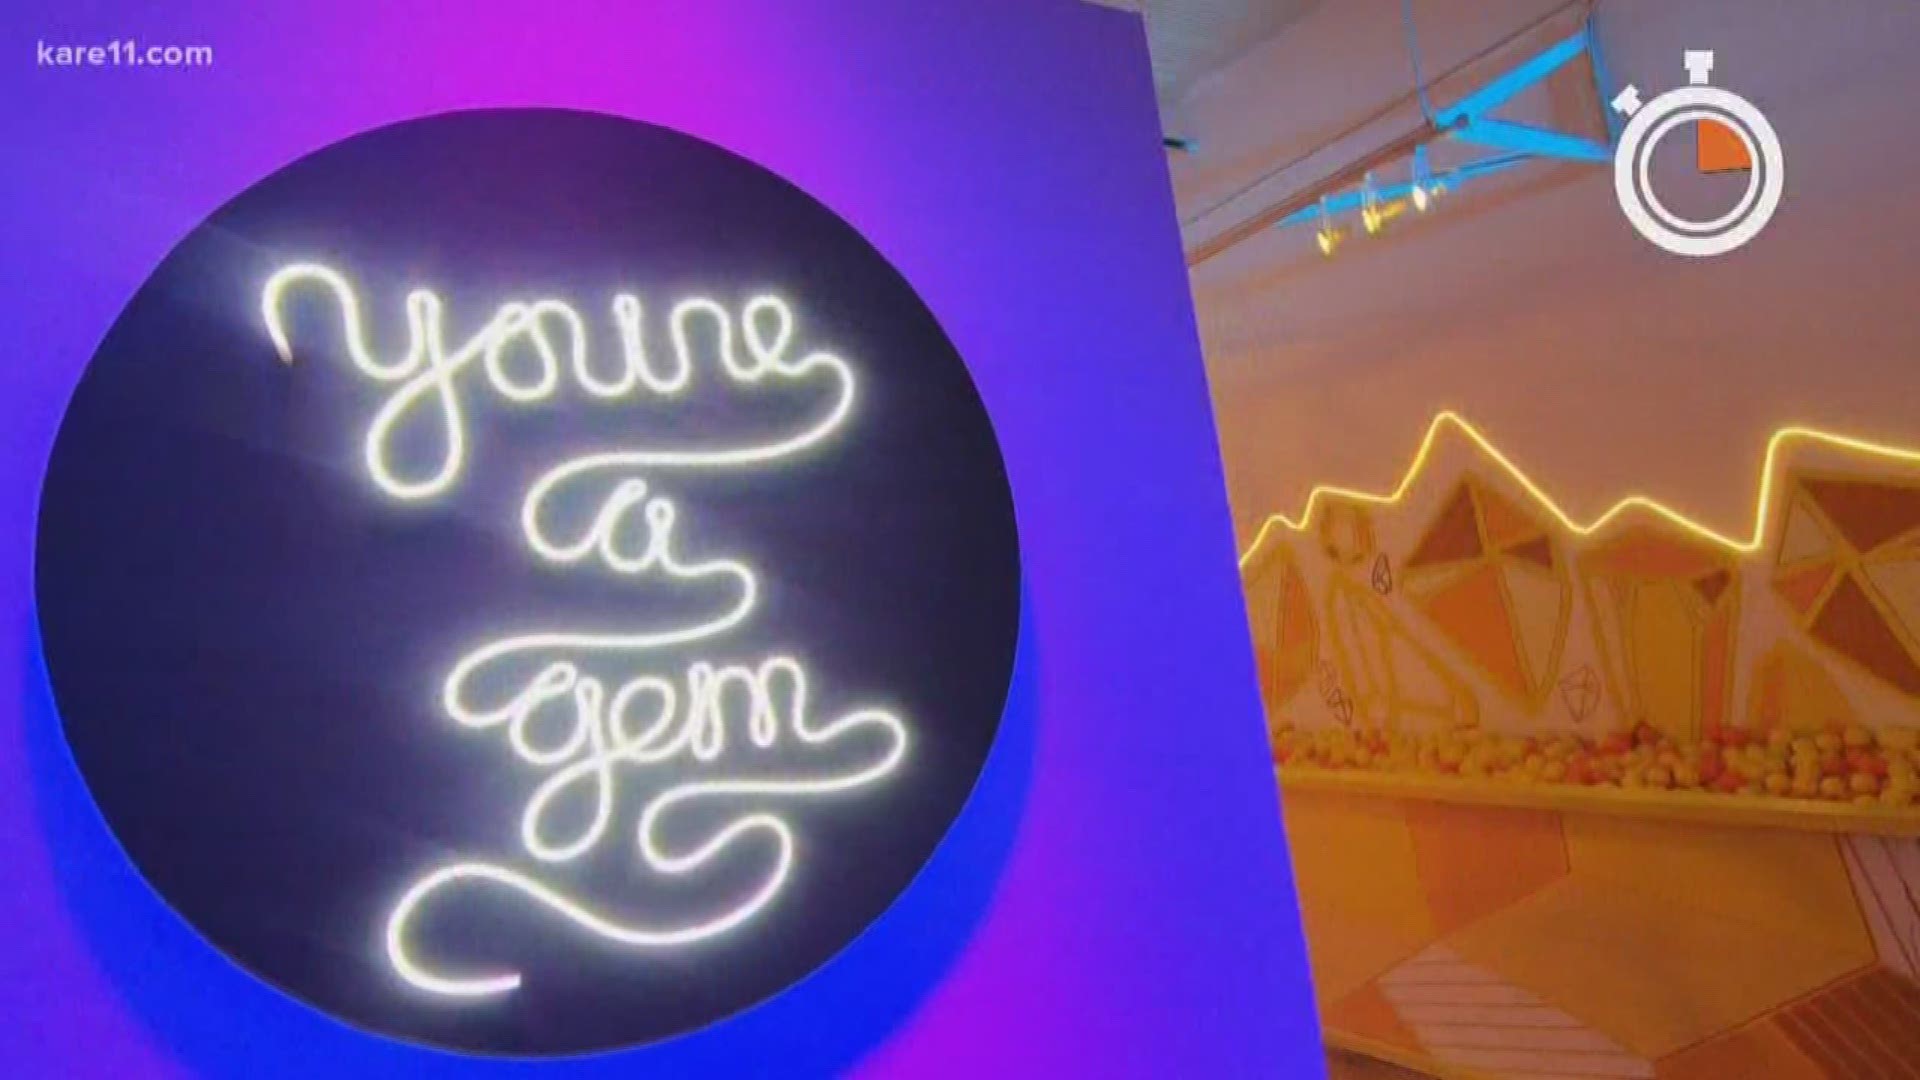 Looking to step-up your Instagram game? The 'You're A Gem' pop-up museum in Minneapolis is the perfect place!